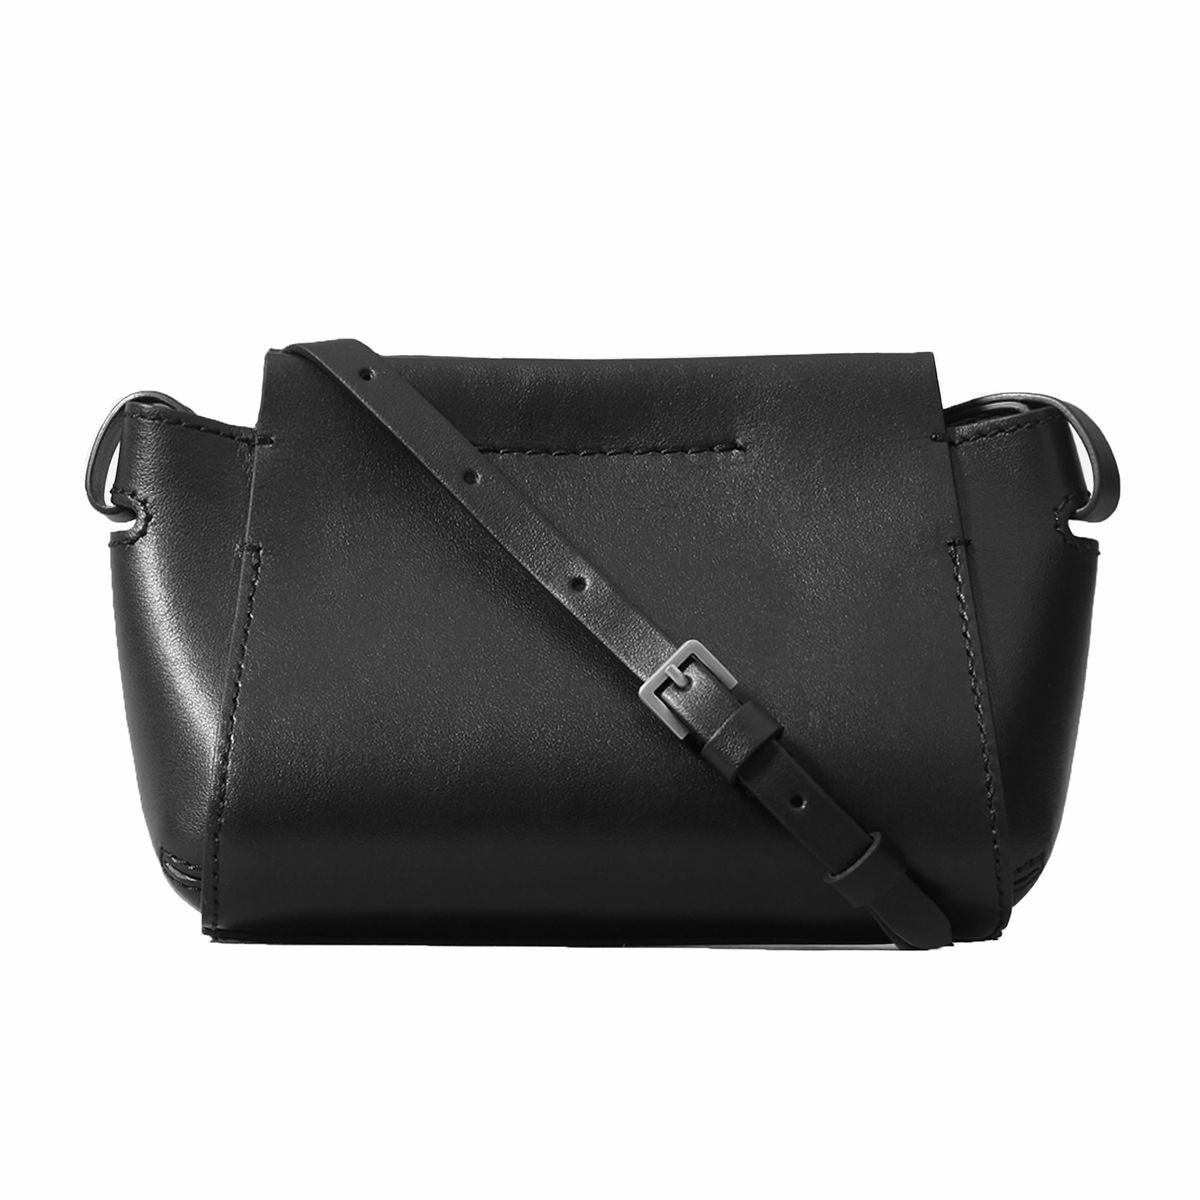 Everlane Just Released The Micro Form Bag | InStyle